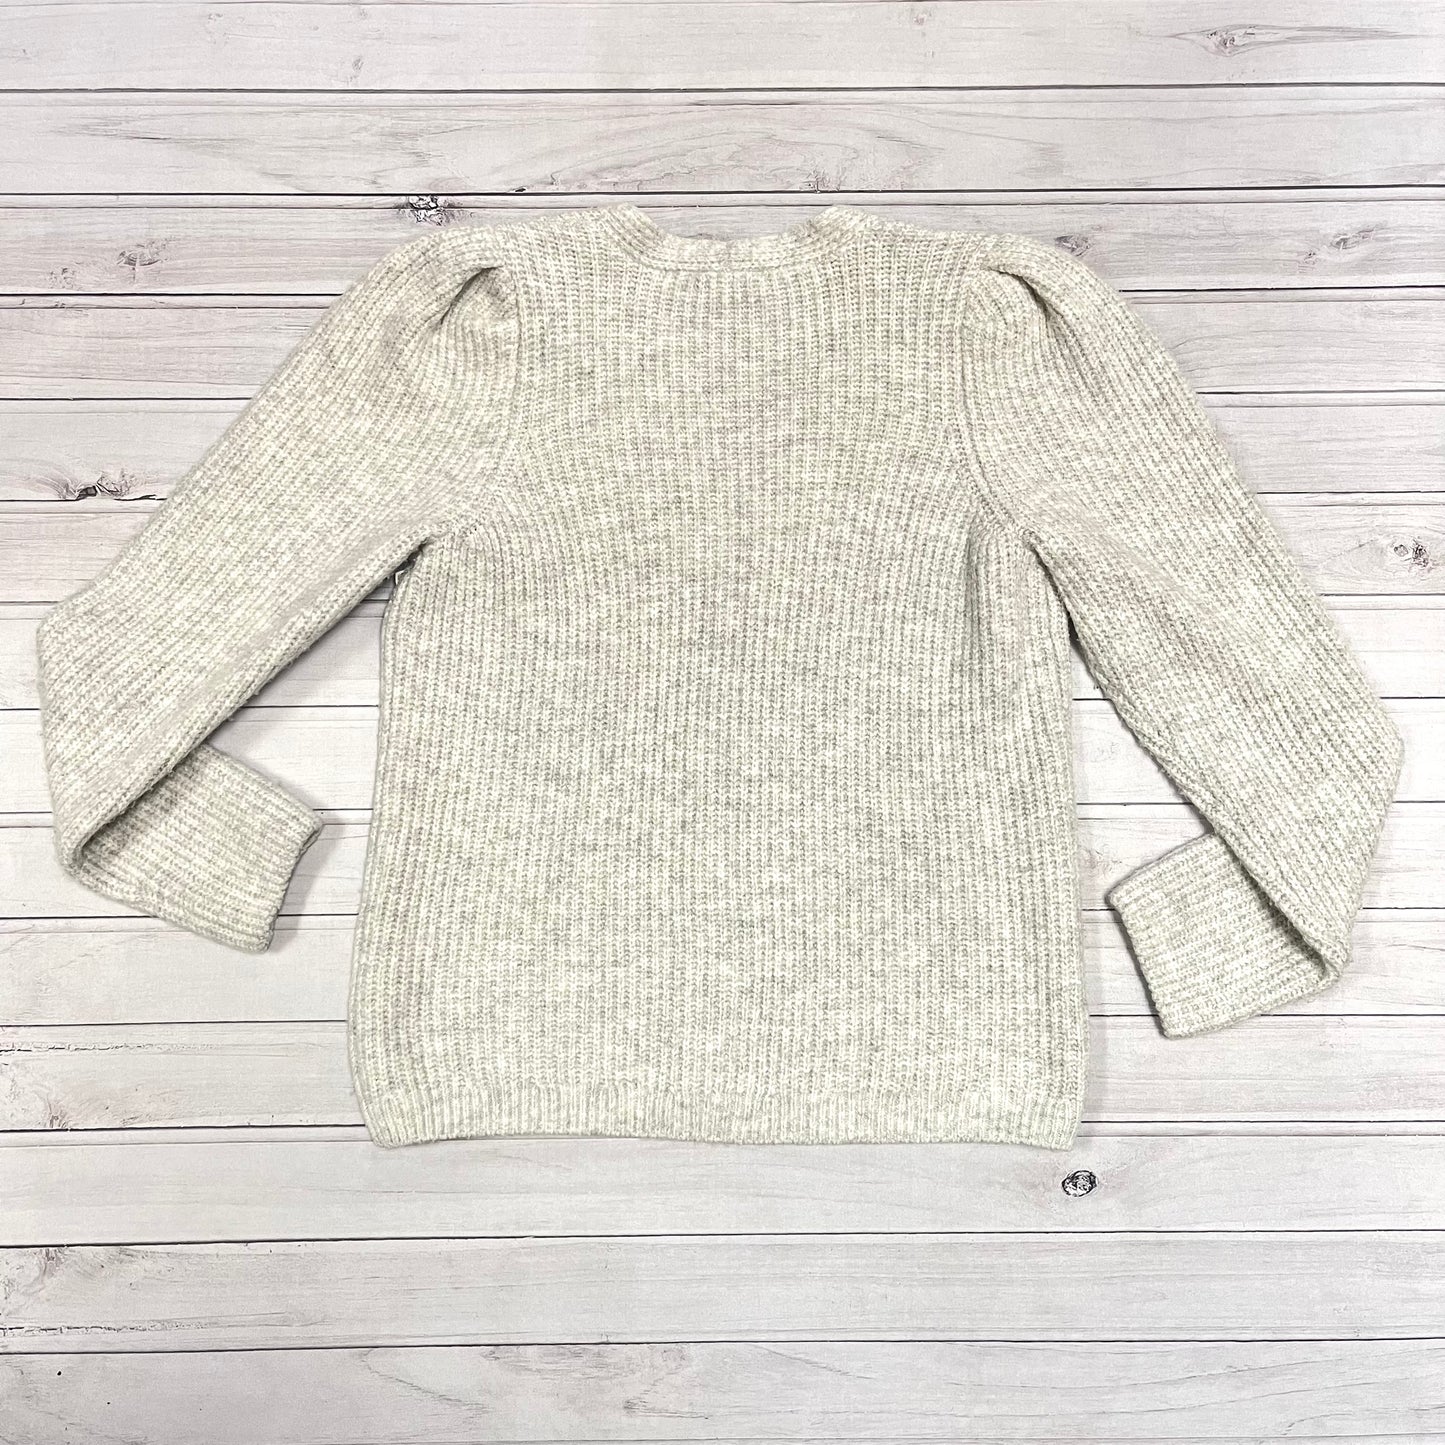 Sweater Cardigan By Vince Camuto  Size: M